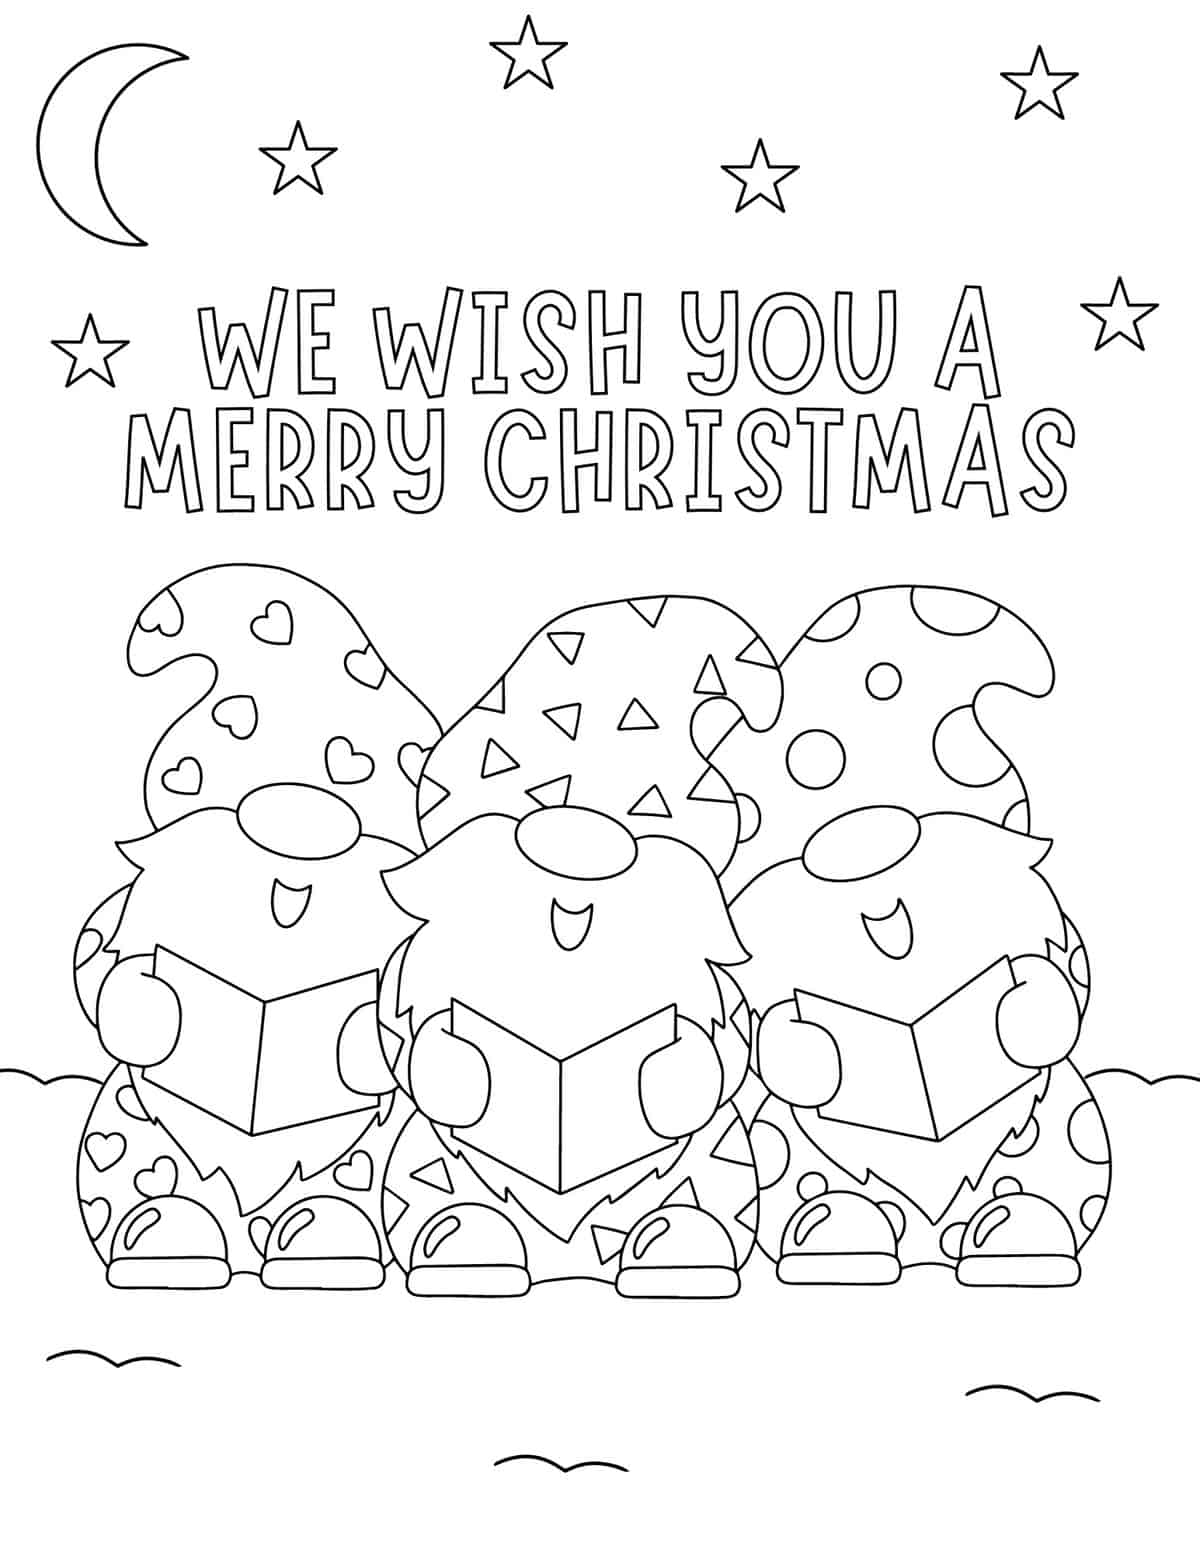 gnomes singing we wish you a Merry Christmas coloring sheet